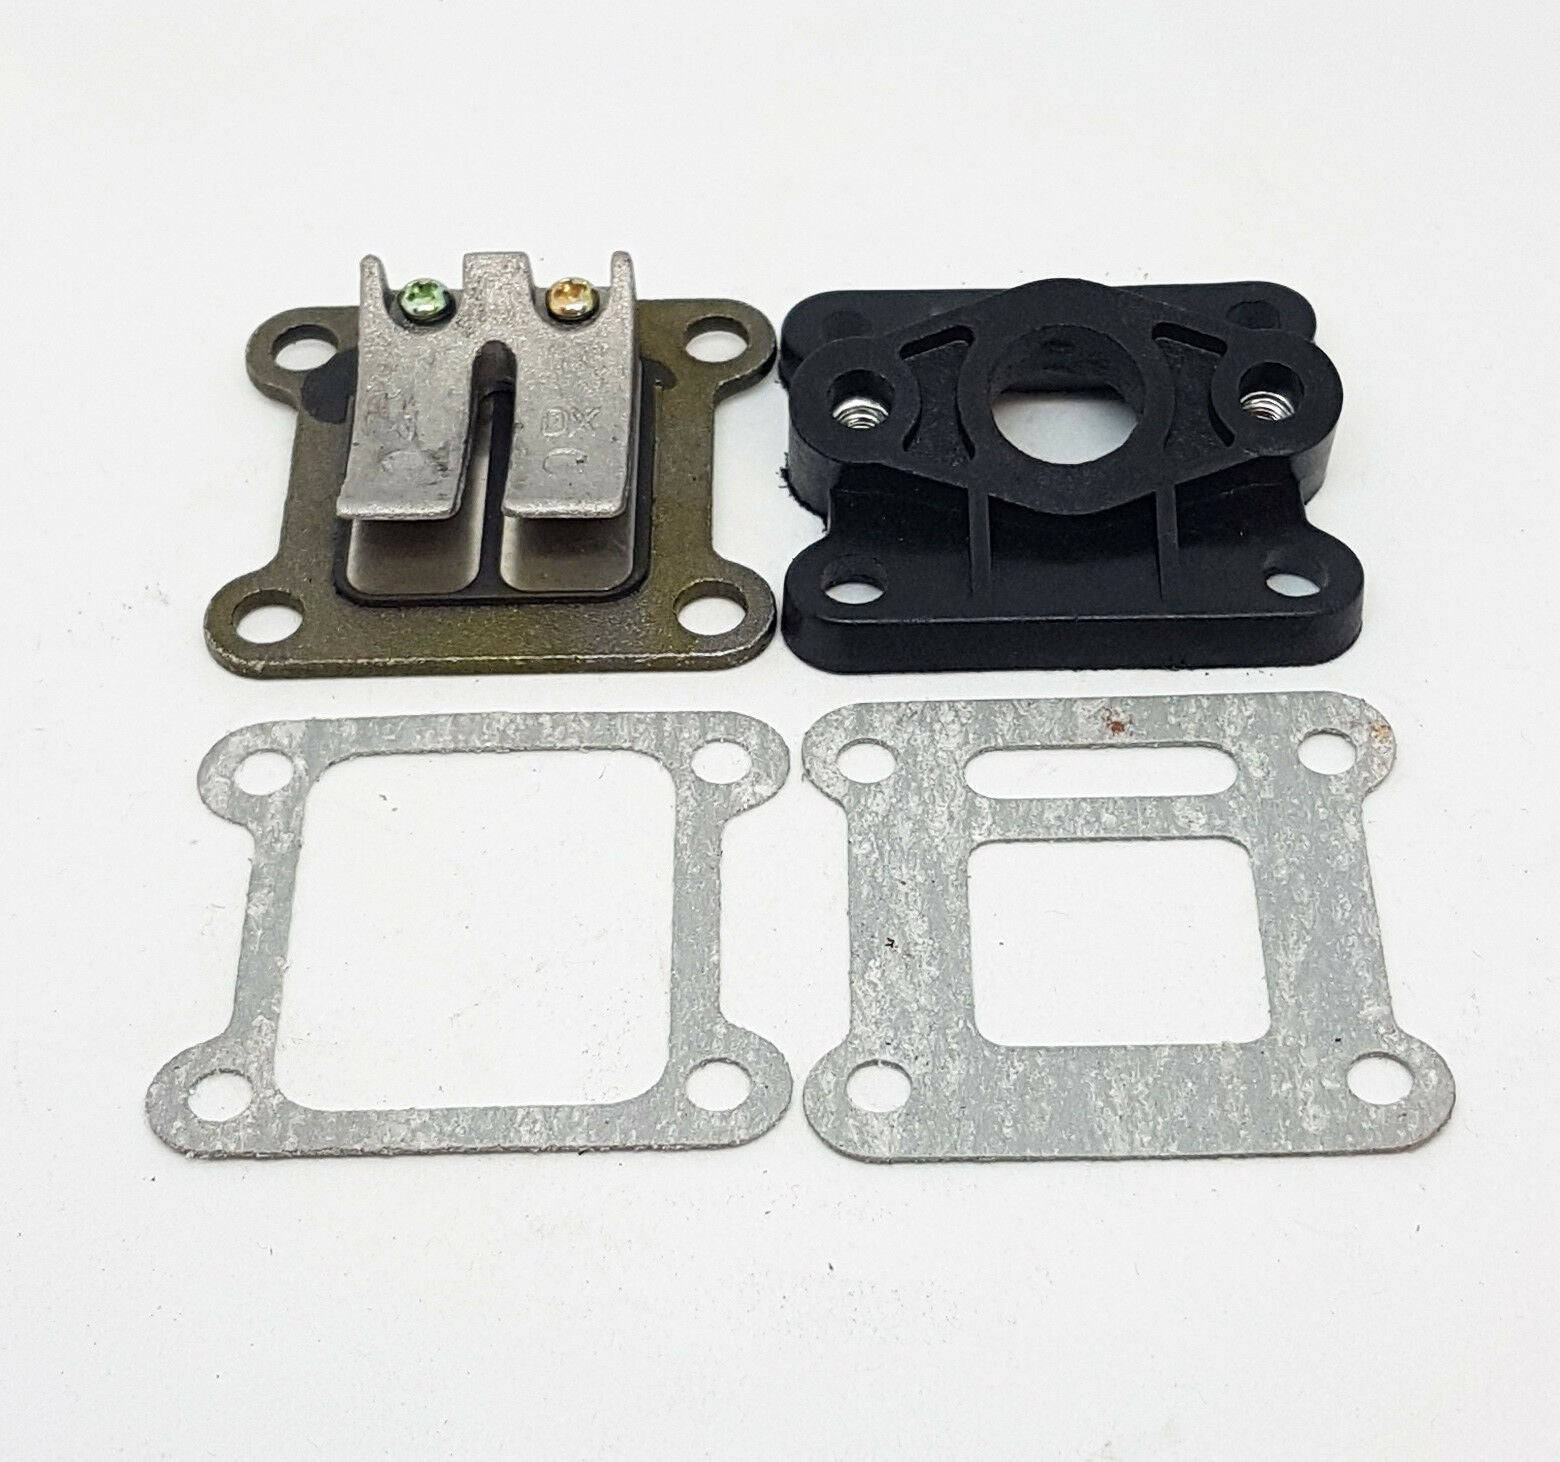 Load image into Gallery viewer, SET OF INLET MANIFOLD REEDS AND GASKETS FOR 47 - 49CC MINI MOTO / MINI DIRT / MINI QUAD BIKE
